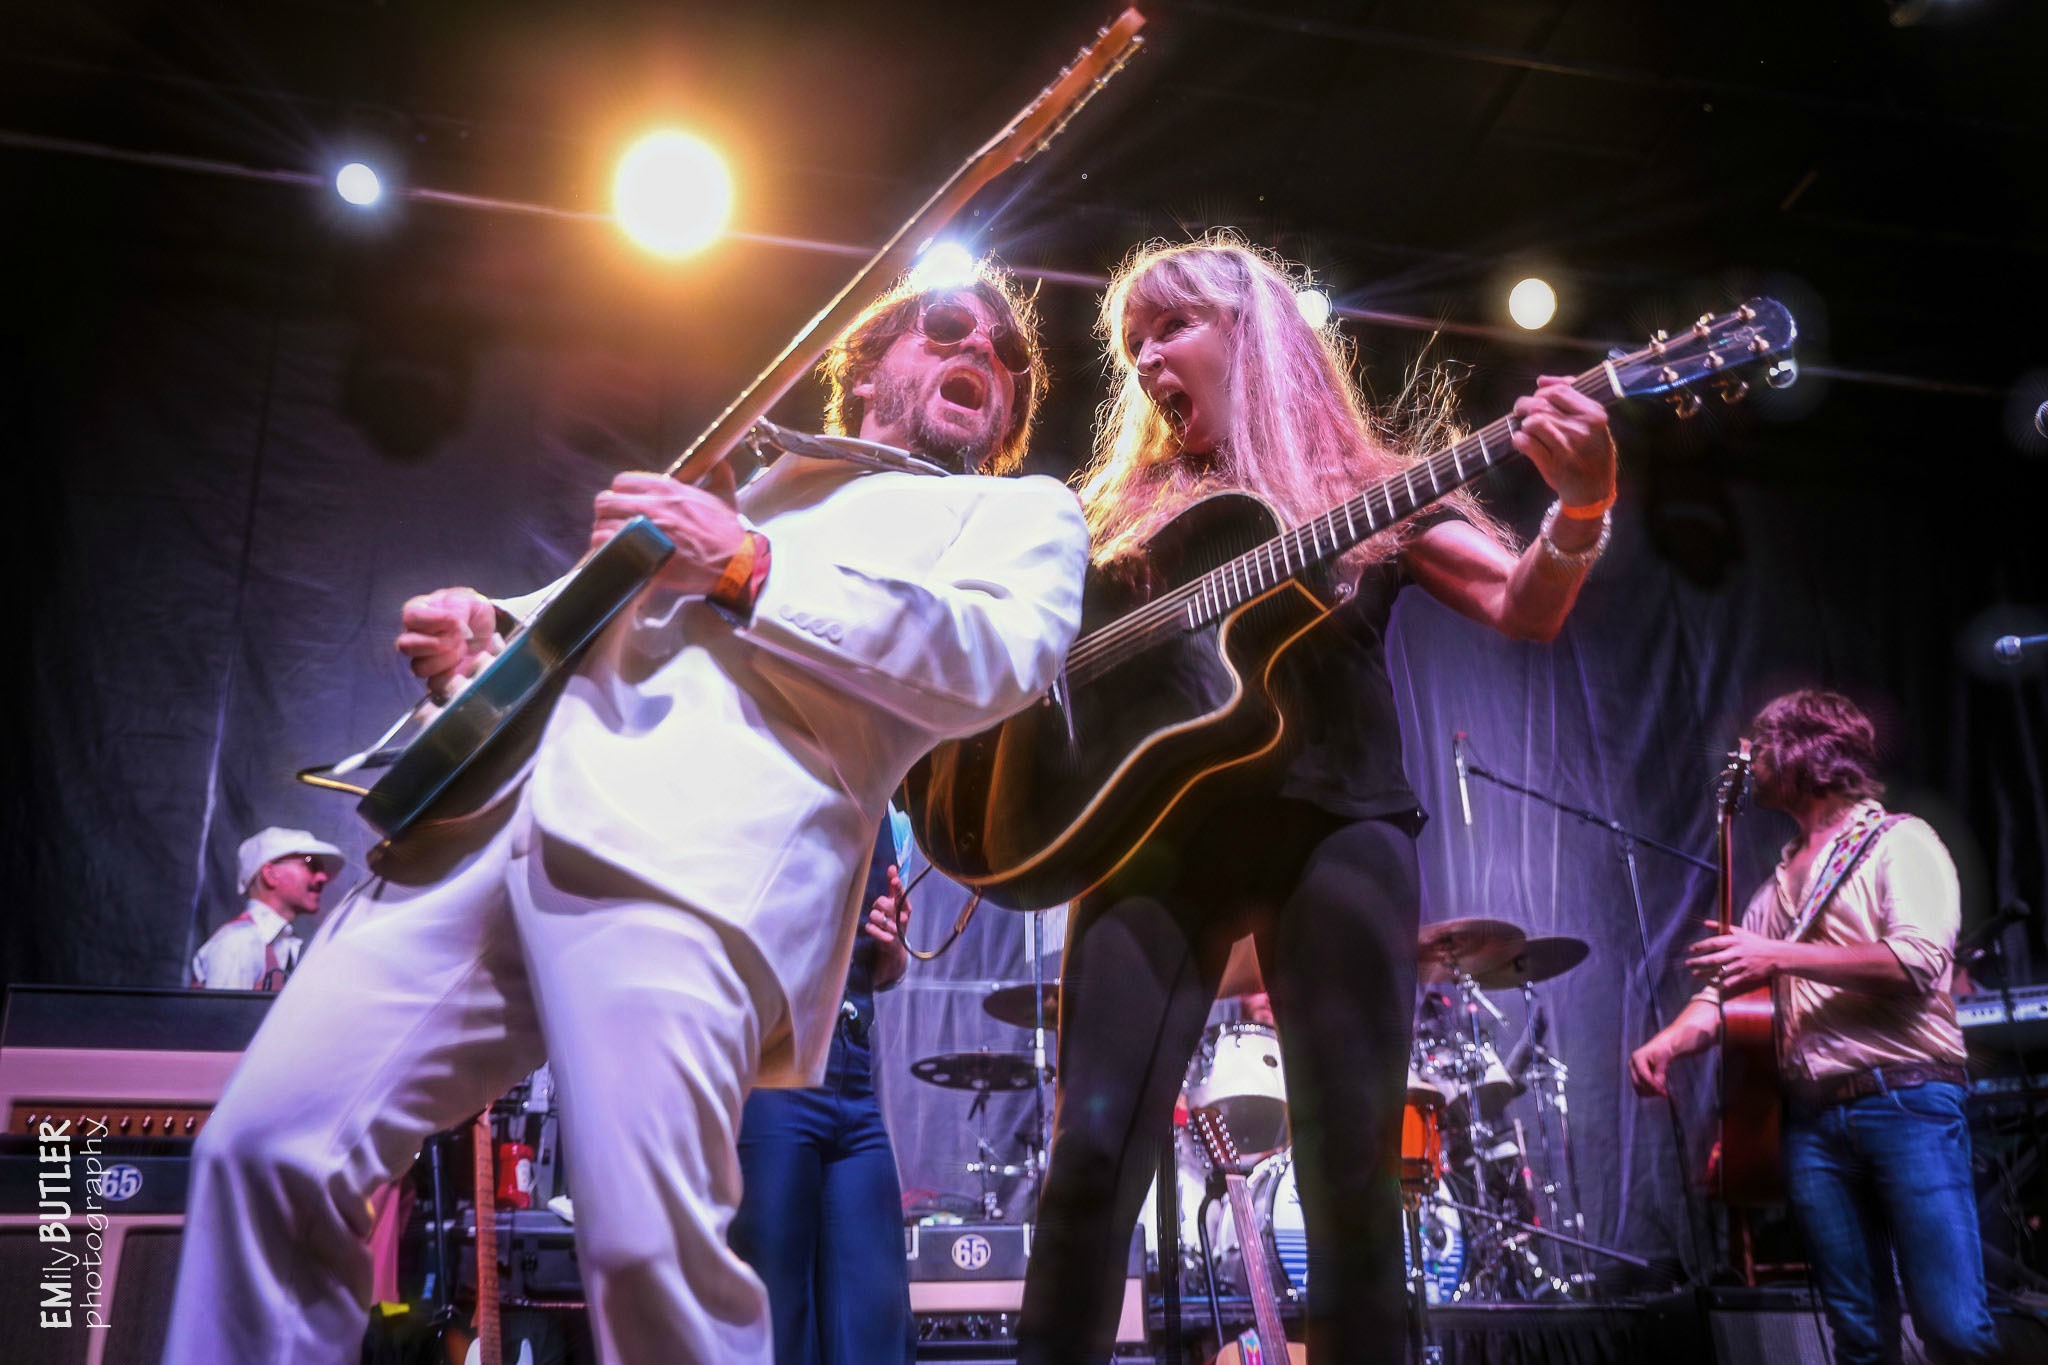 Juice performing with others at the Yacht Rock Revue show in Atlanta Georgia August 2016..